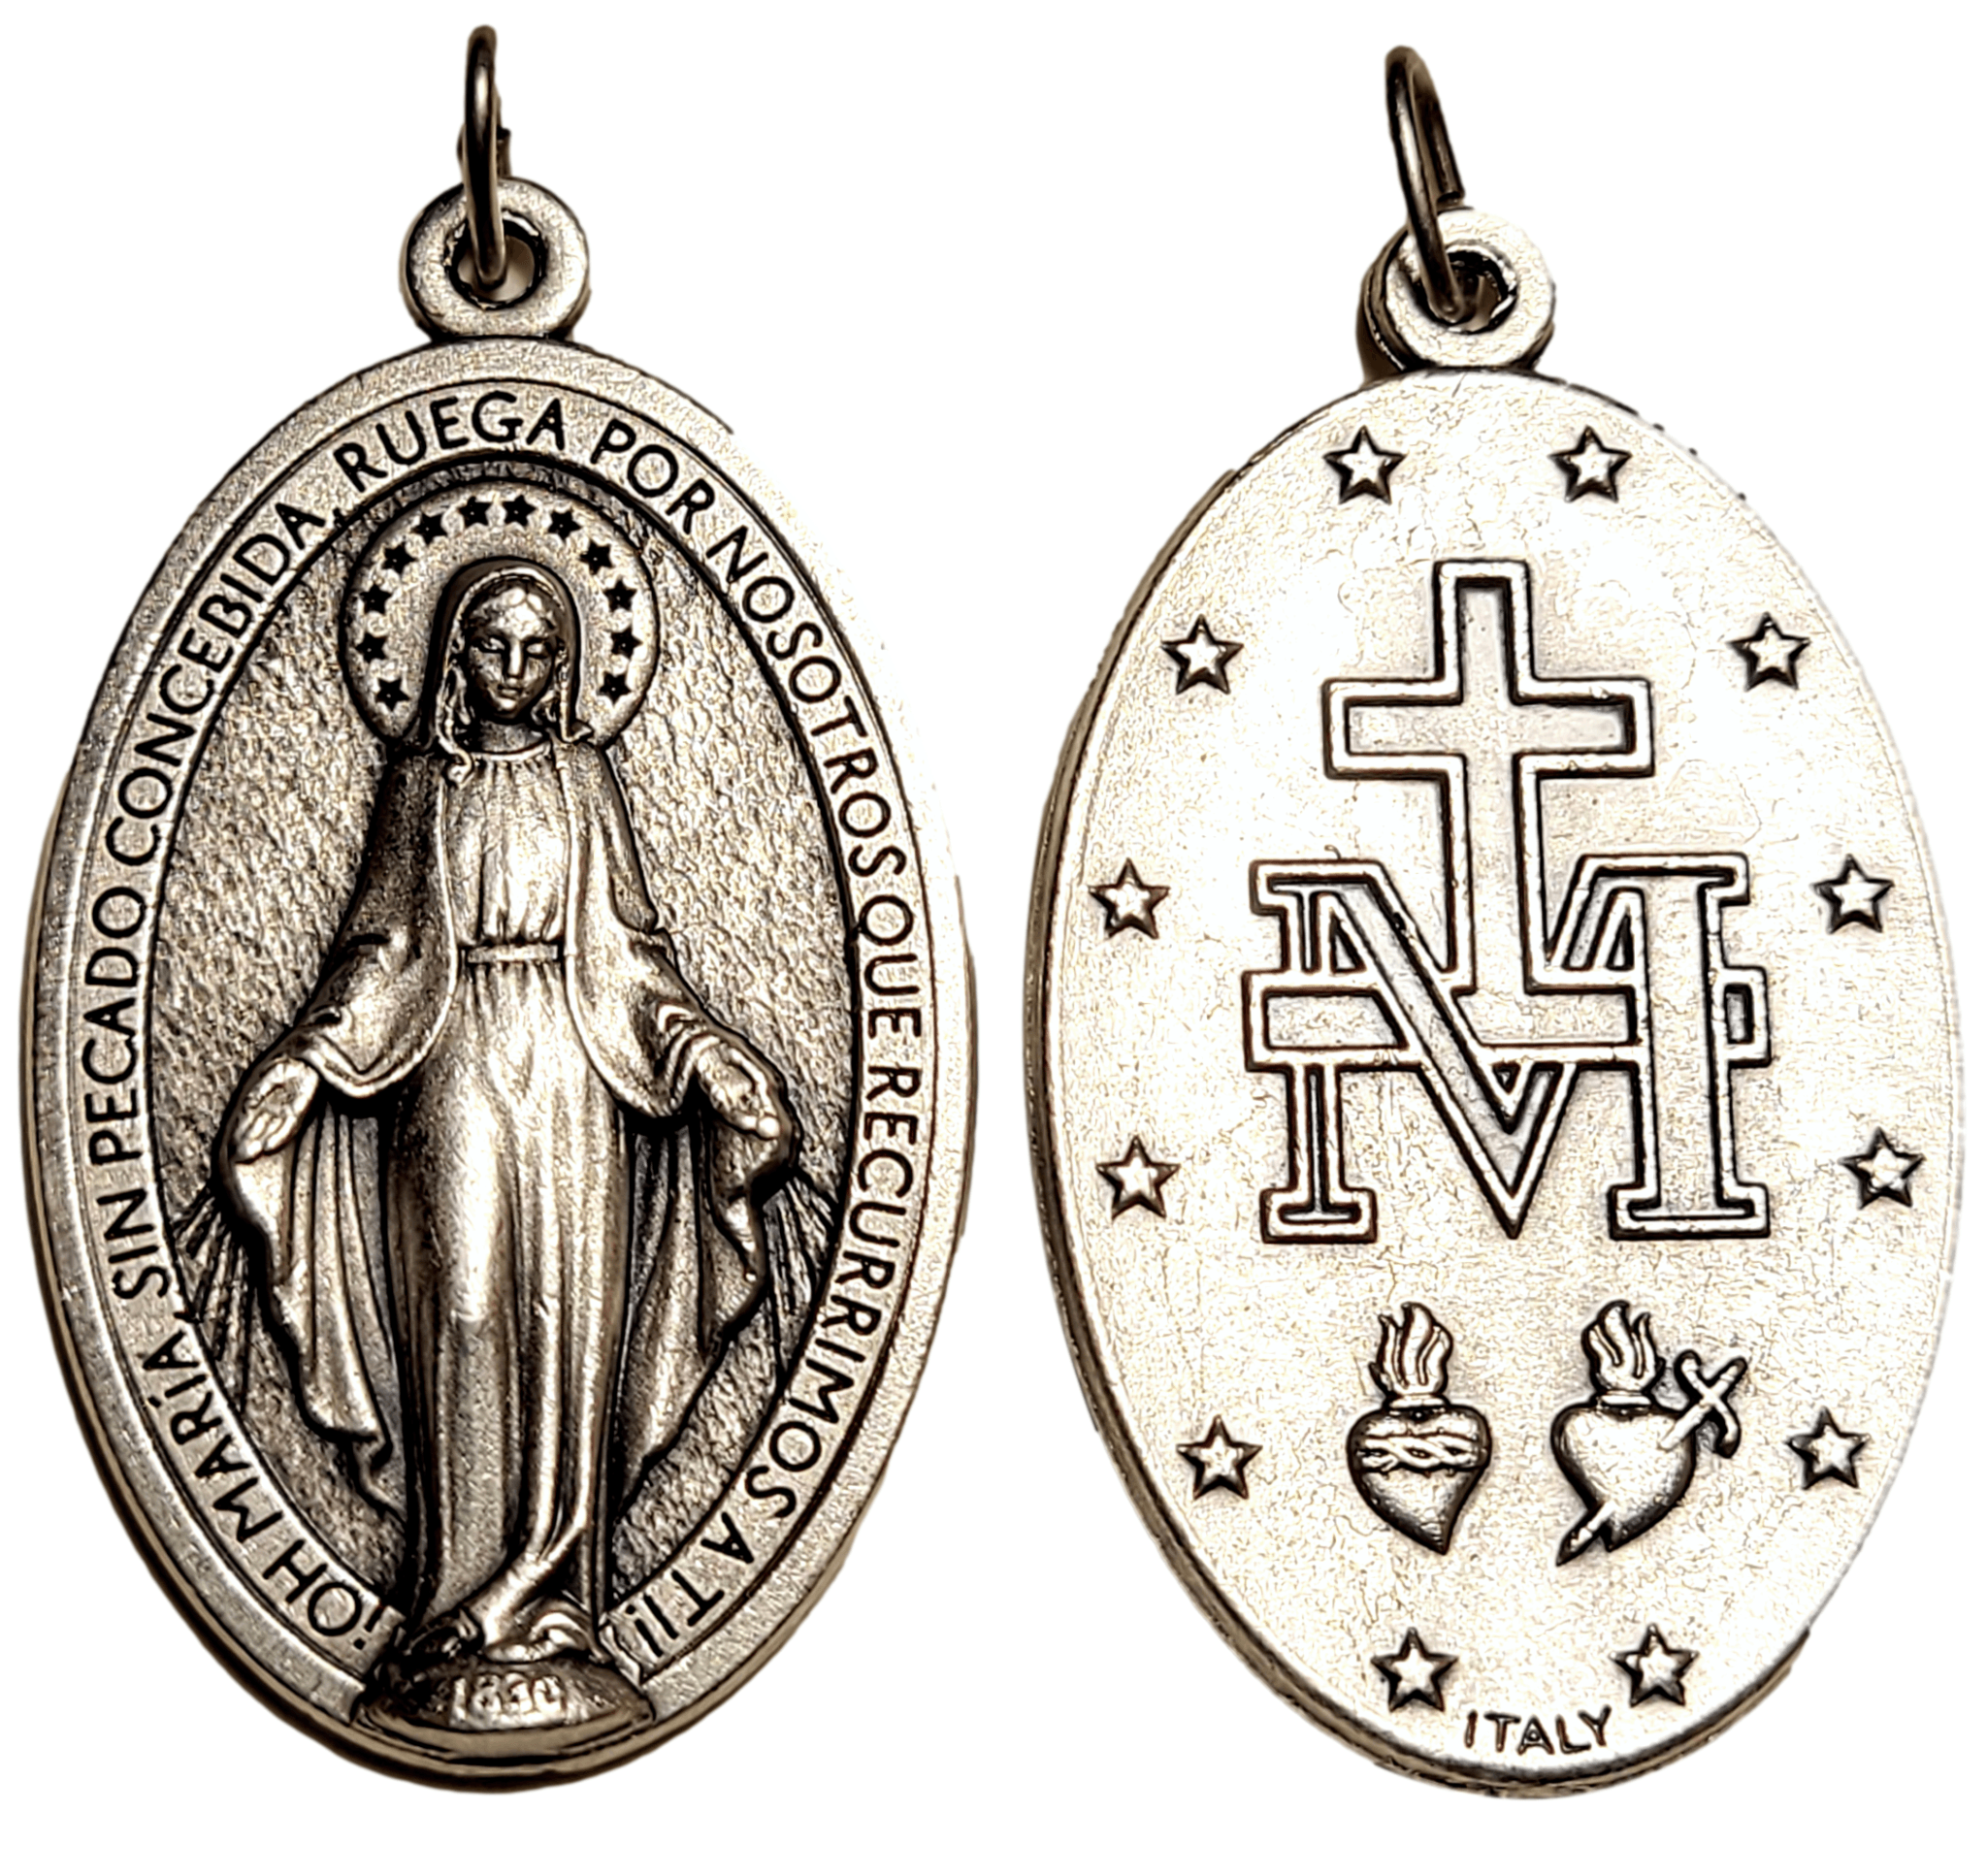 Medallion Our Lady of Miracles Miraculous Medal Italian Oxidized Metal Alloy 1 3/4 L x 1 W Inches - Ysleta Mission Gift Shop- VOTED El Paso's Best Gift Shop